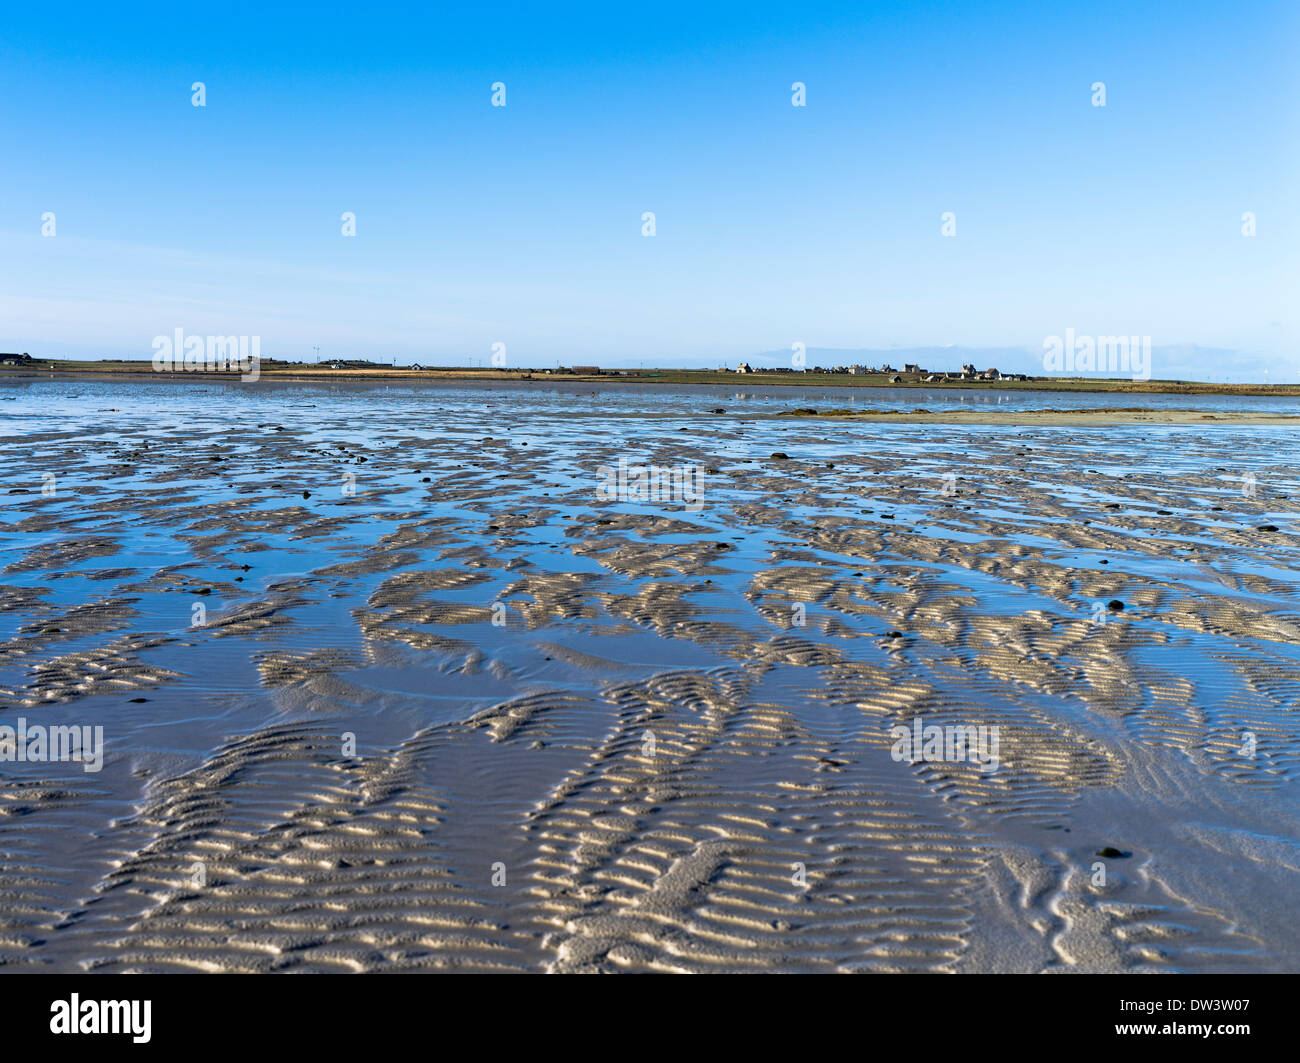 dh Cata Sand SANDAY ORKNEY Beach sand patterns tide out shallow sandy inlet bay Stock Photo